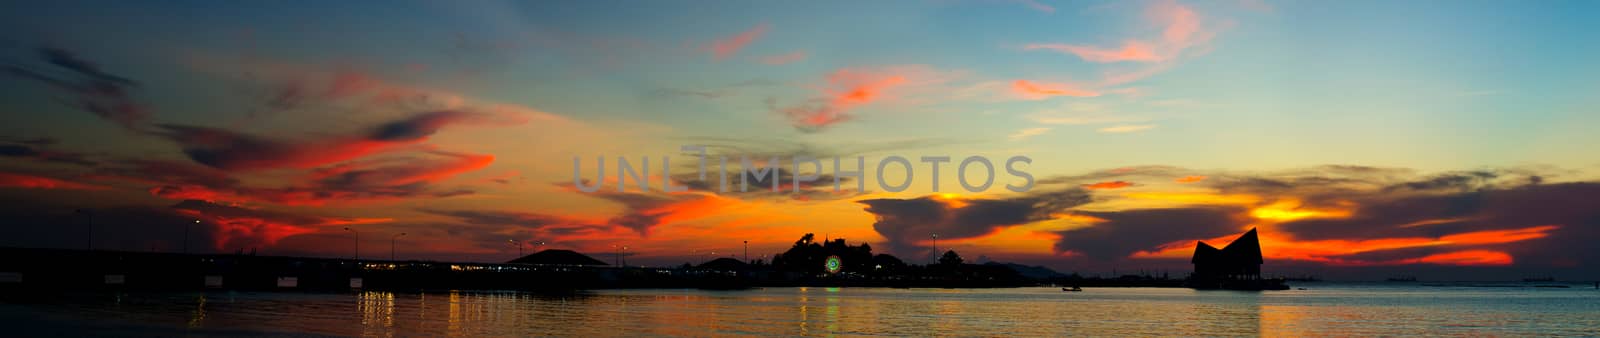 Panoramic sunset sky with silhouette of island (Kho Loi), Landsc by pixbox77